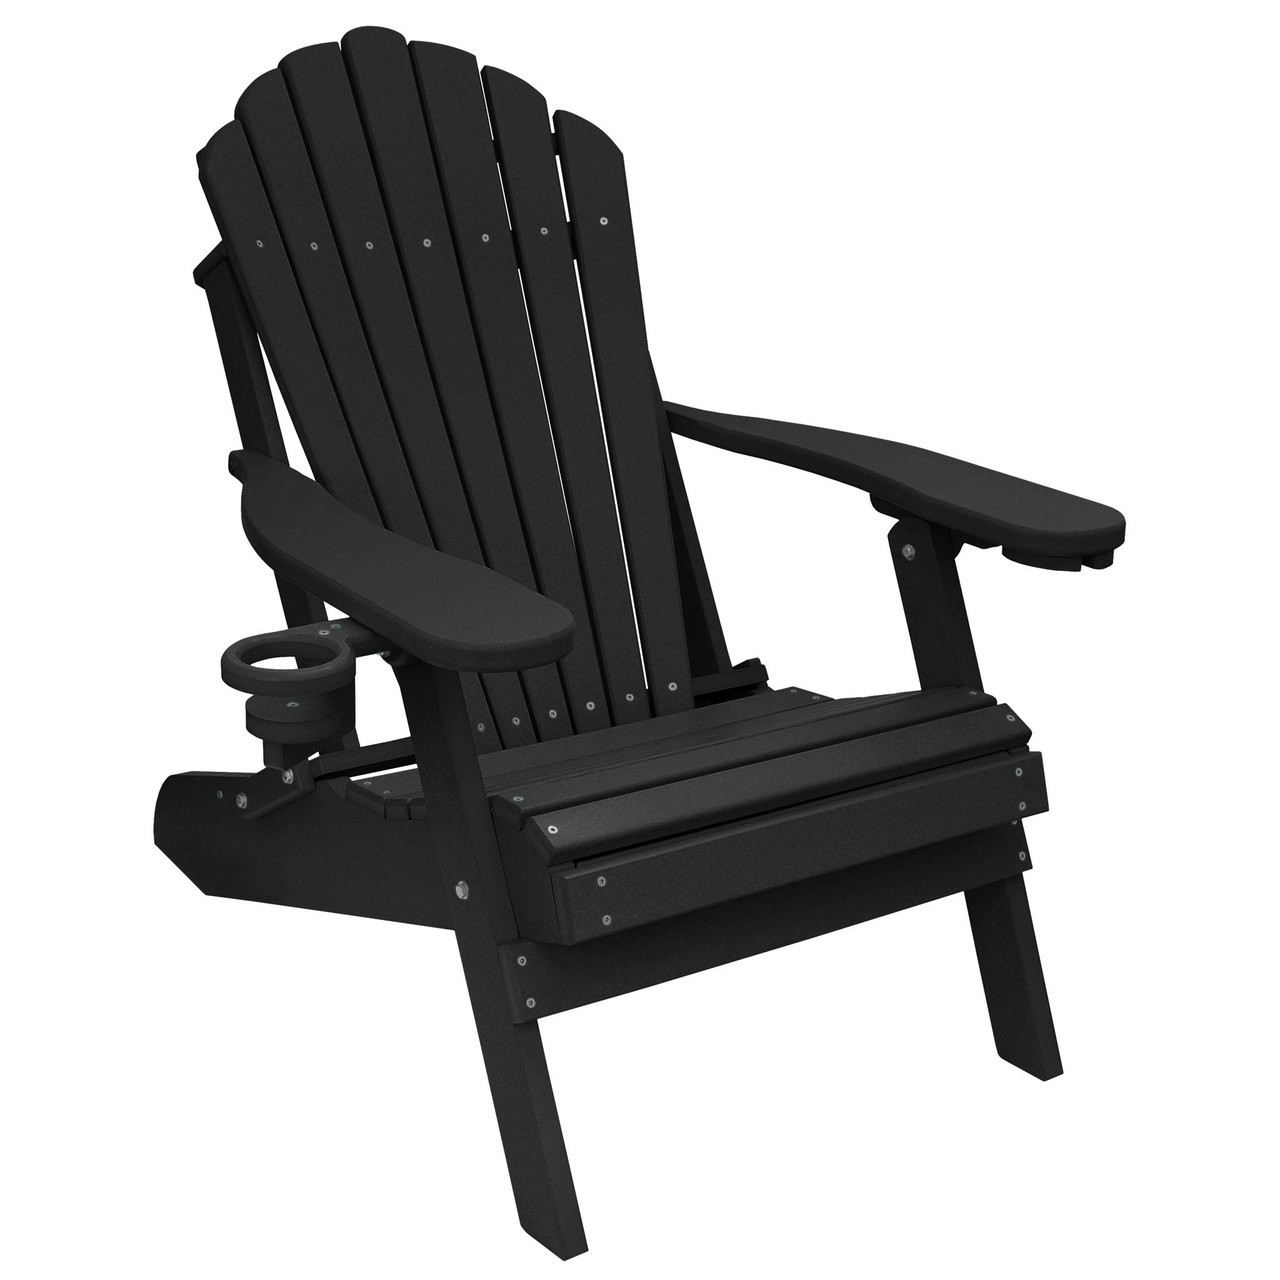  Adirondack Chair Plastic With Cup Holder for Simple Design